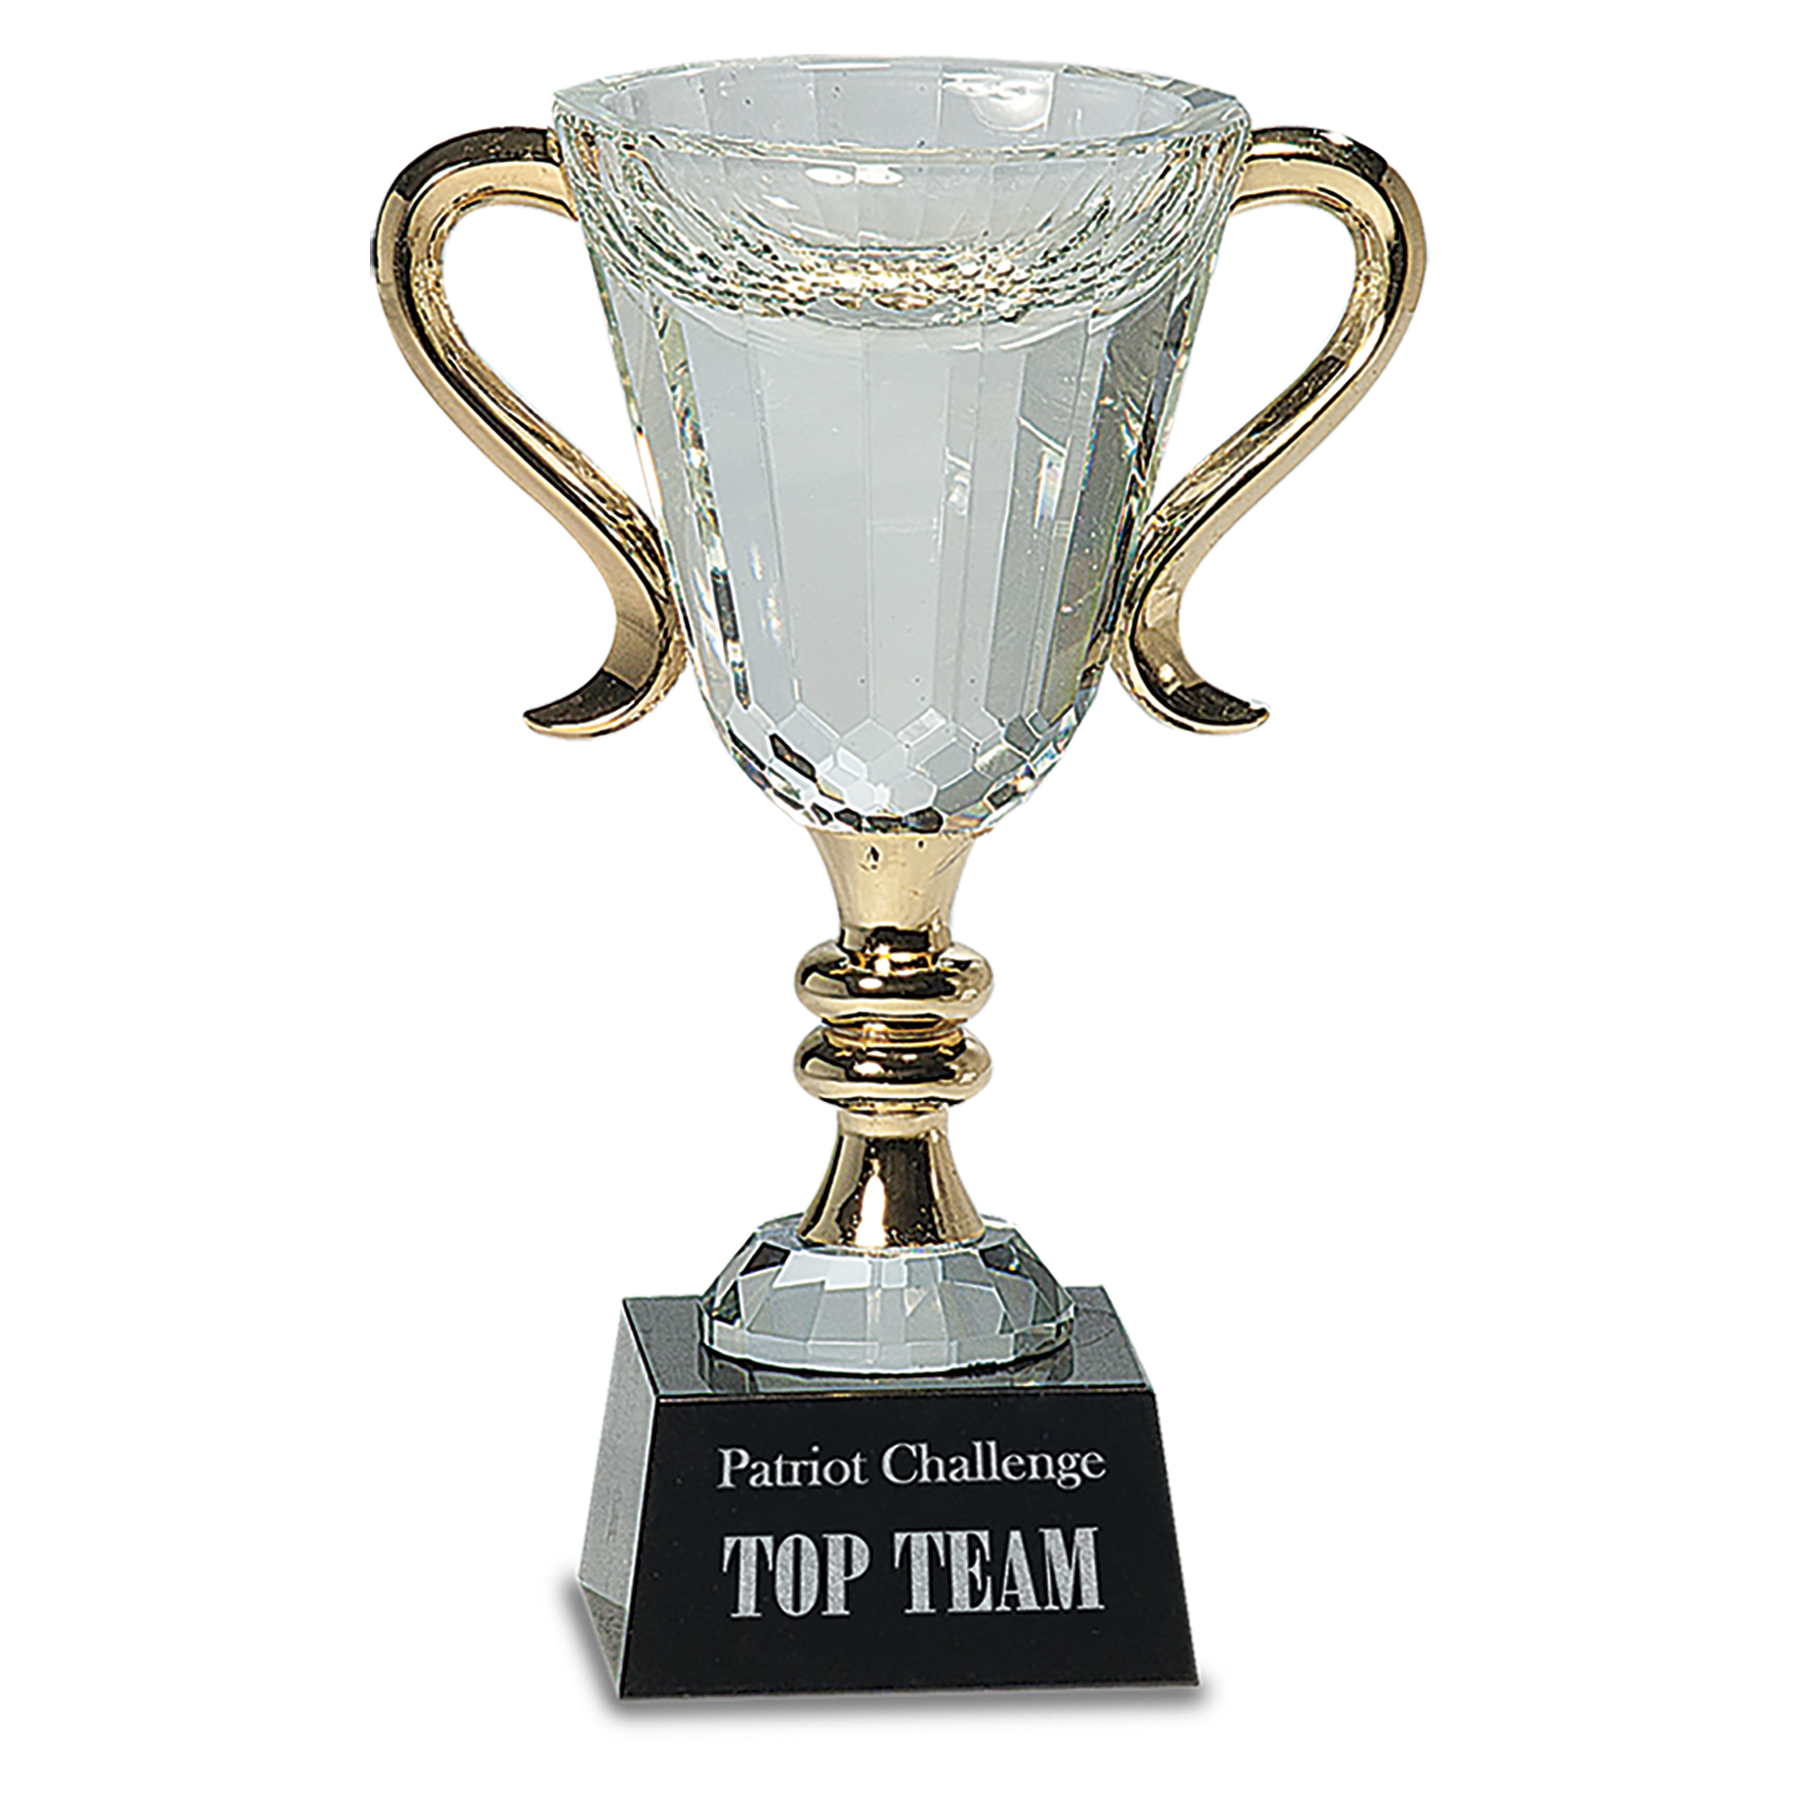 Crystal Trophy Cup Awards with Gold Metal Handles on Black Marble Pedestal